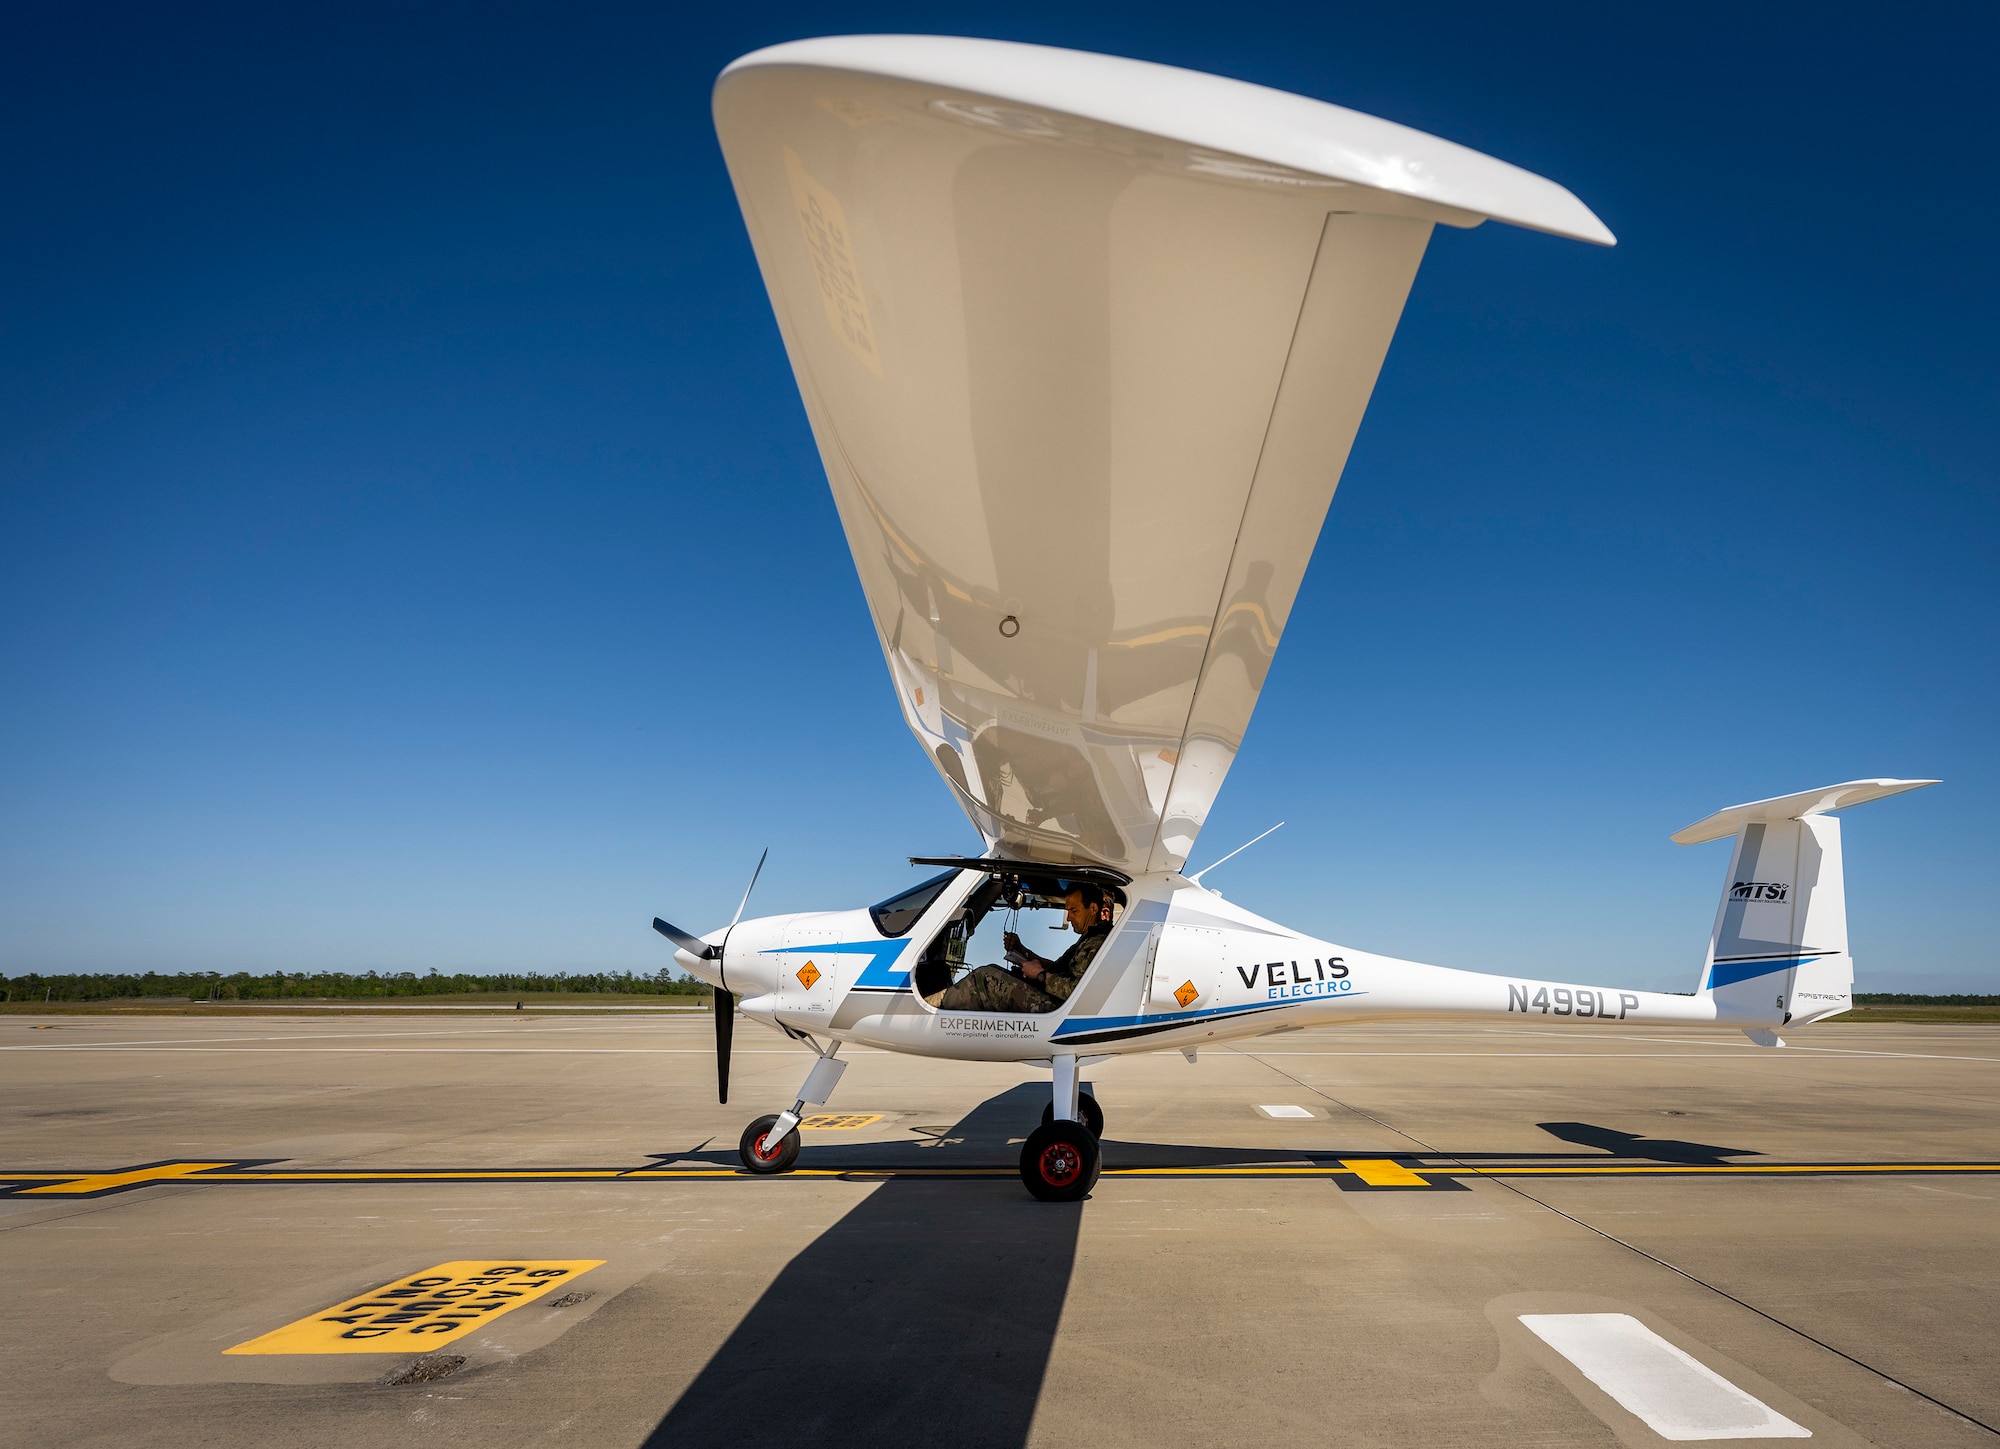 Commander, test pilots evaluate new electric aircraft